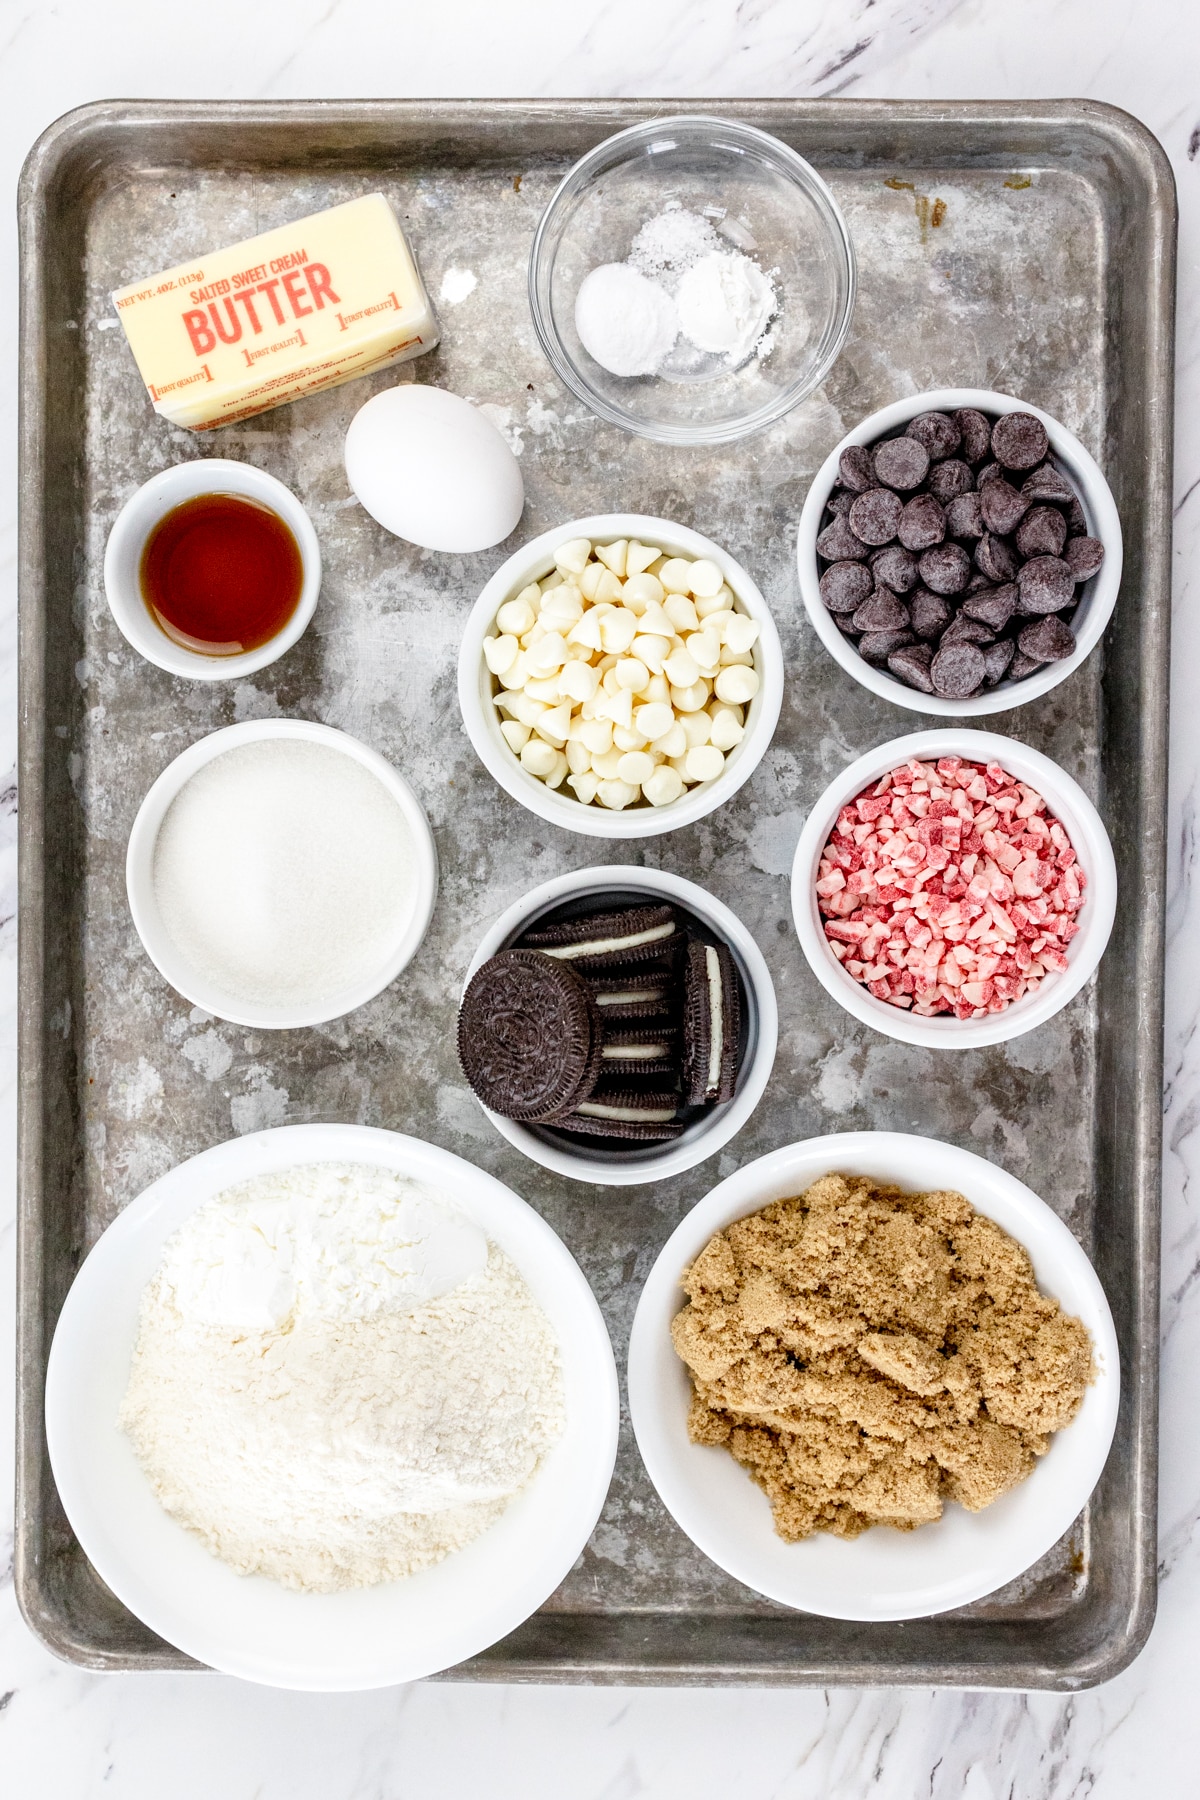 Top view of ingredients needed to make Peppermint Oreo Cookies in small bowls on a baking tray.